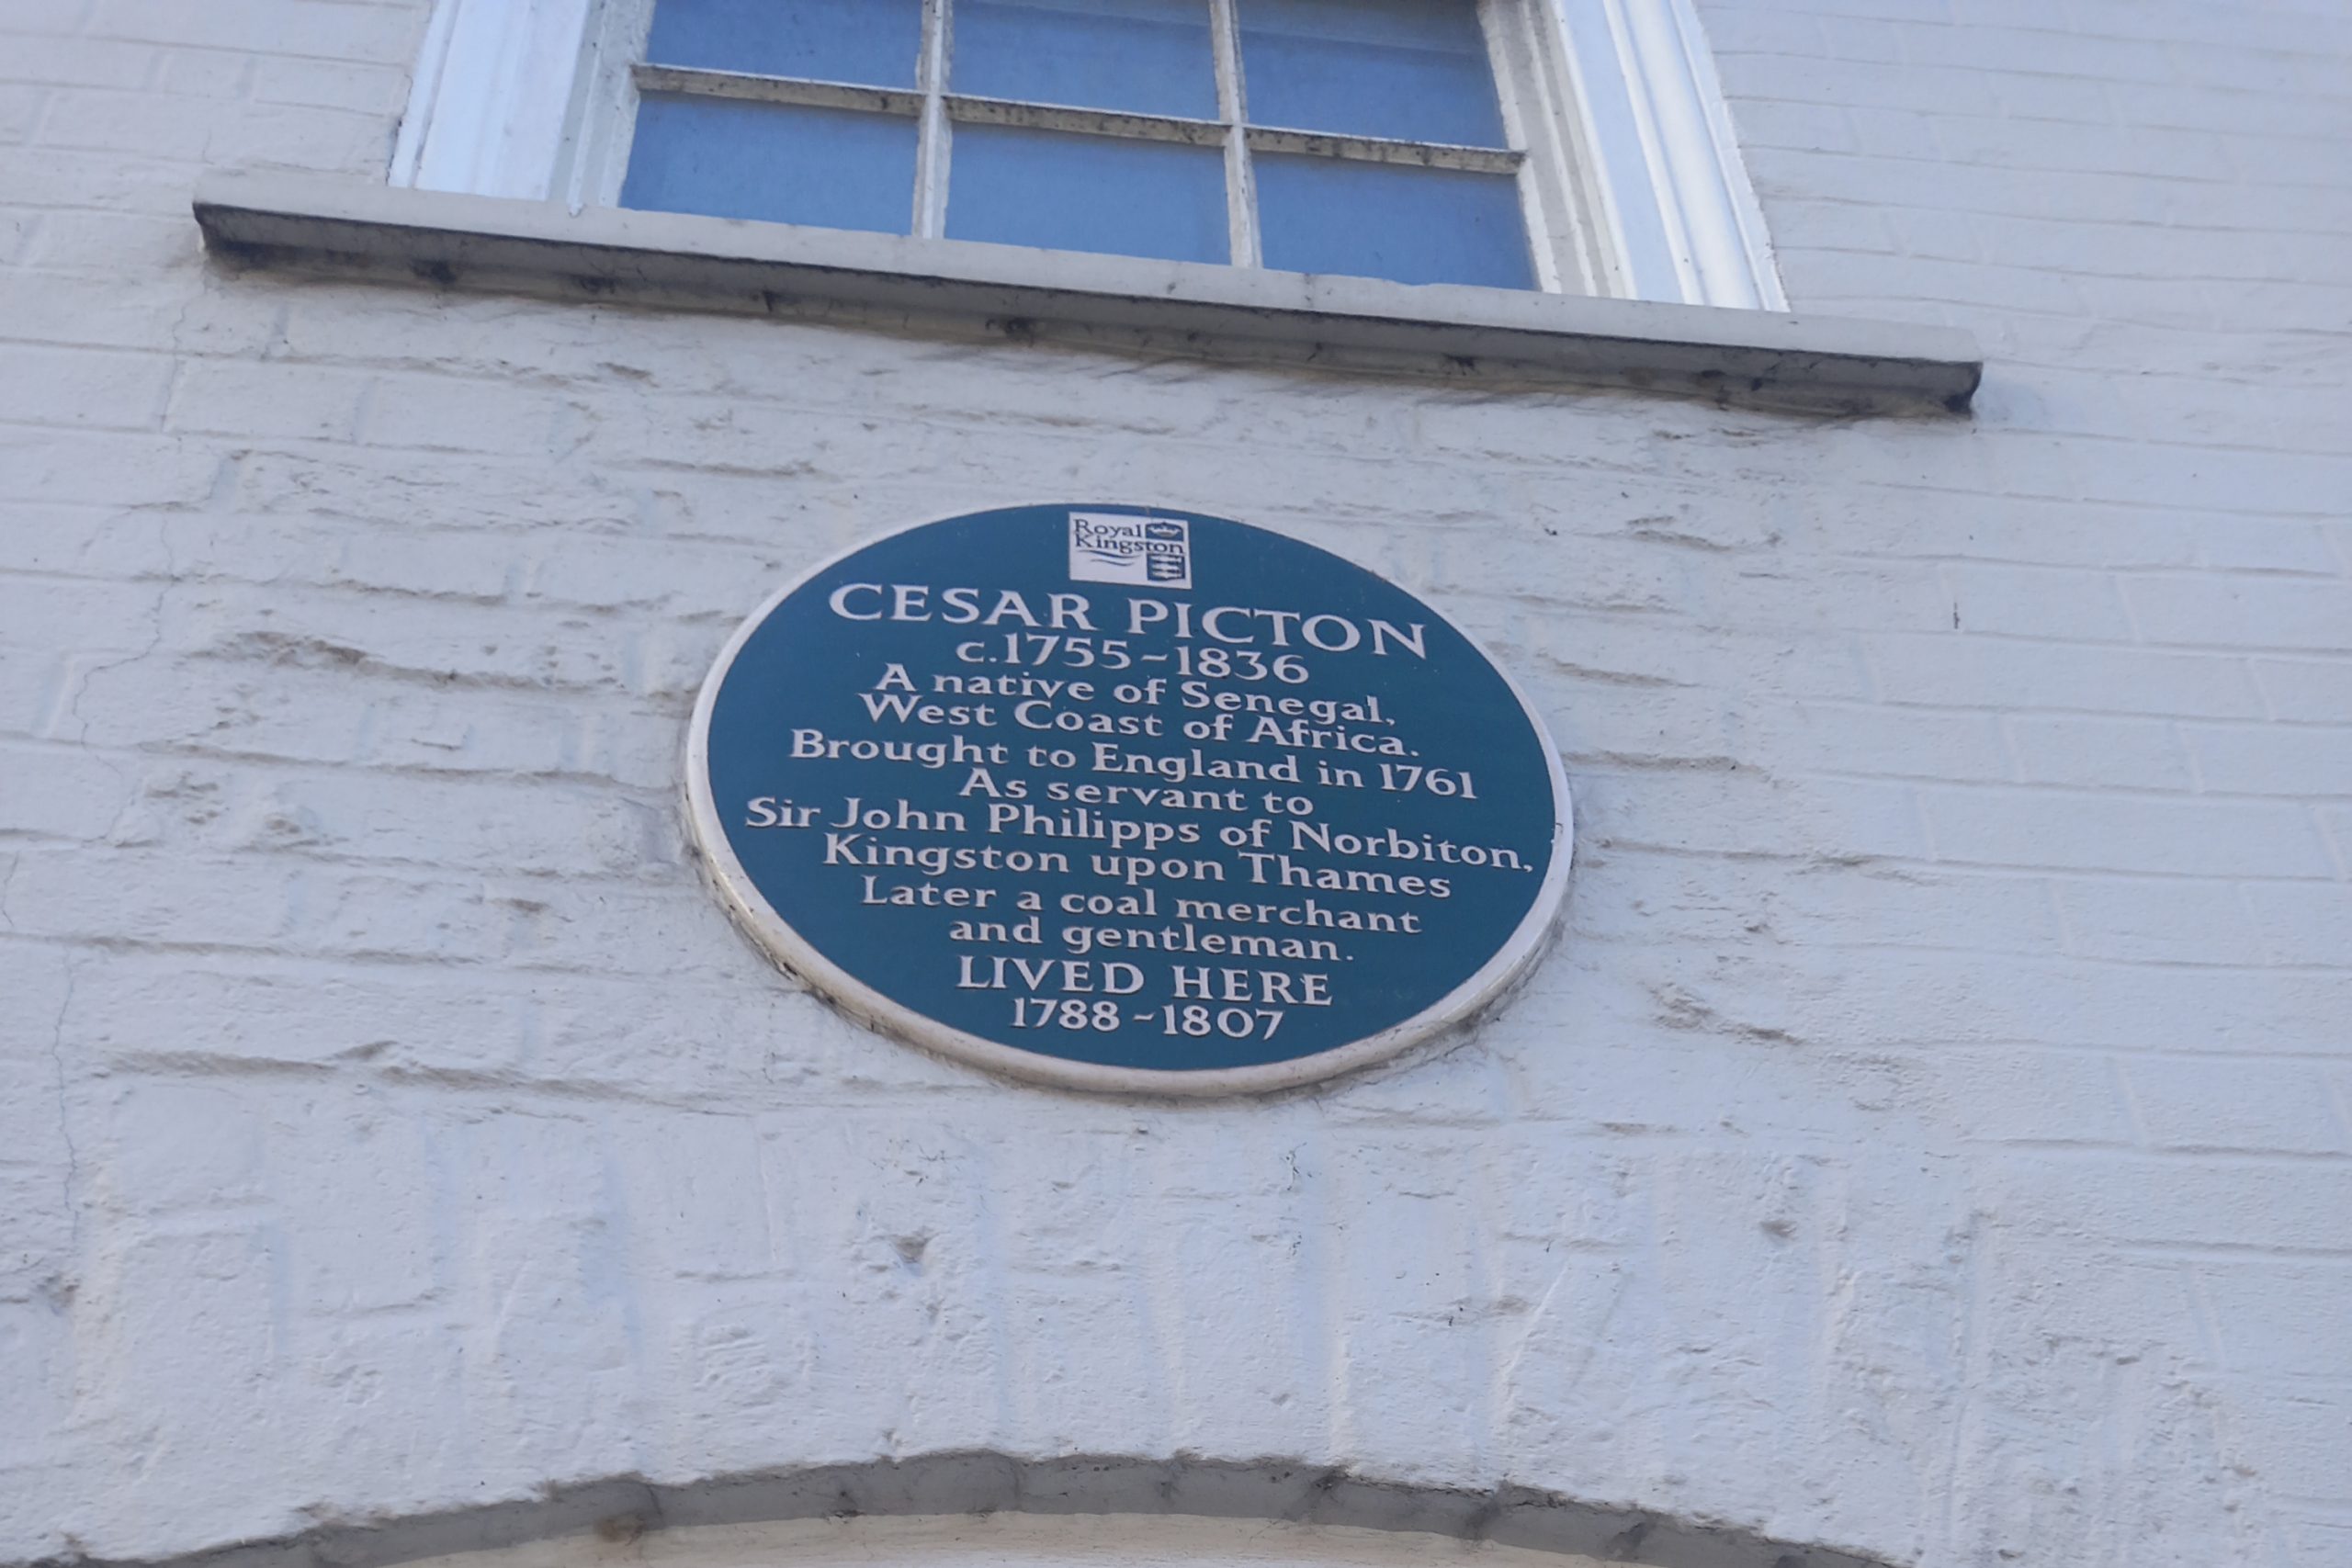 A plaque on Picton House remembering Cesar Picton.